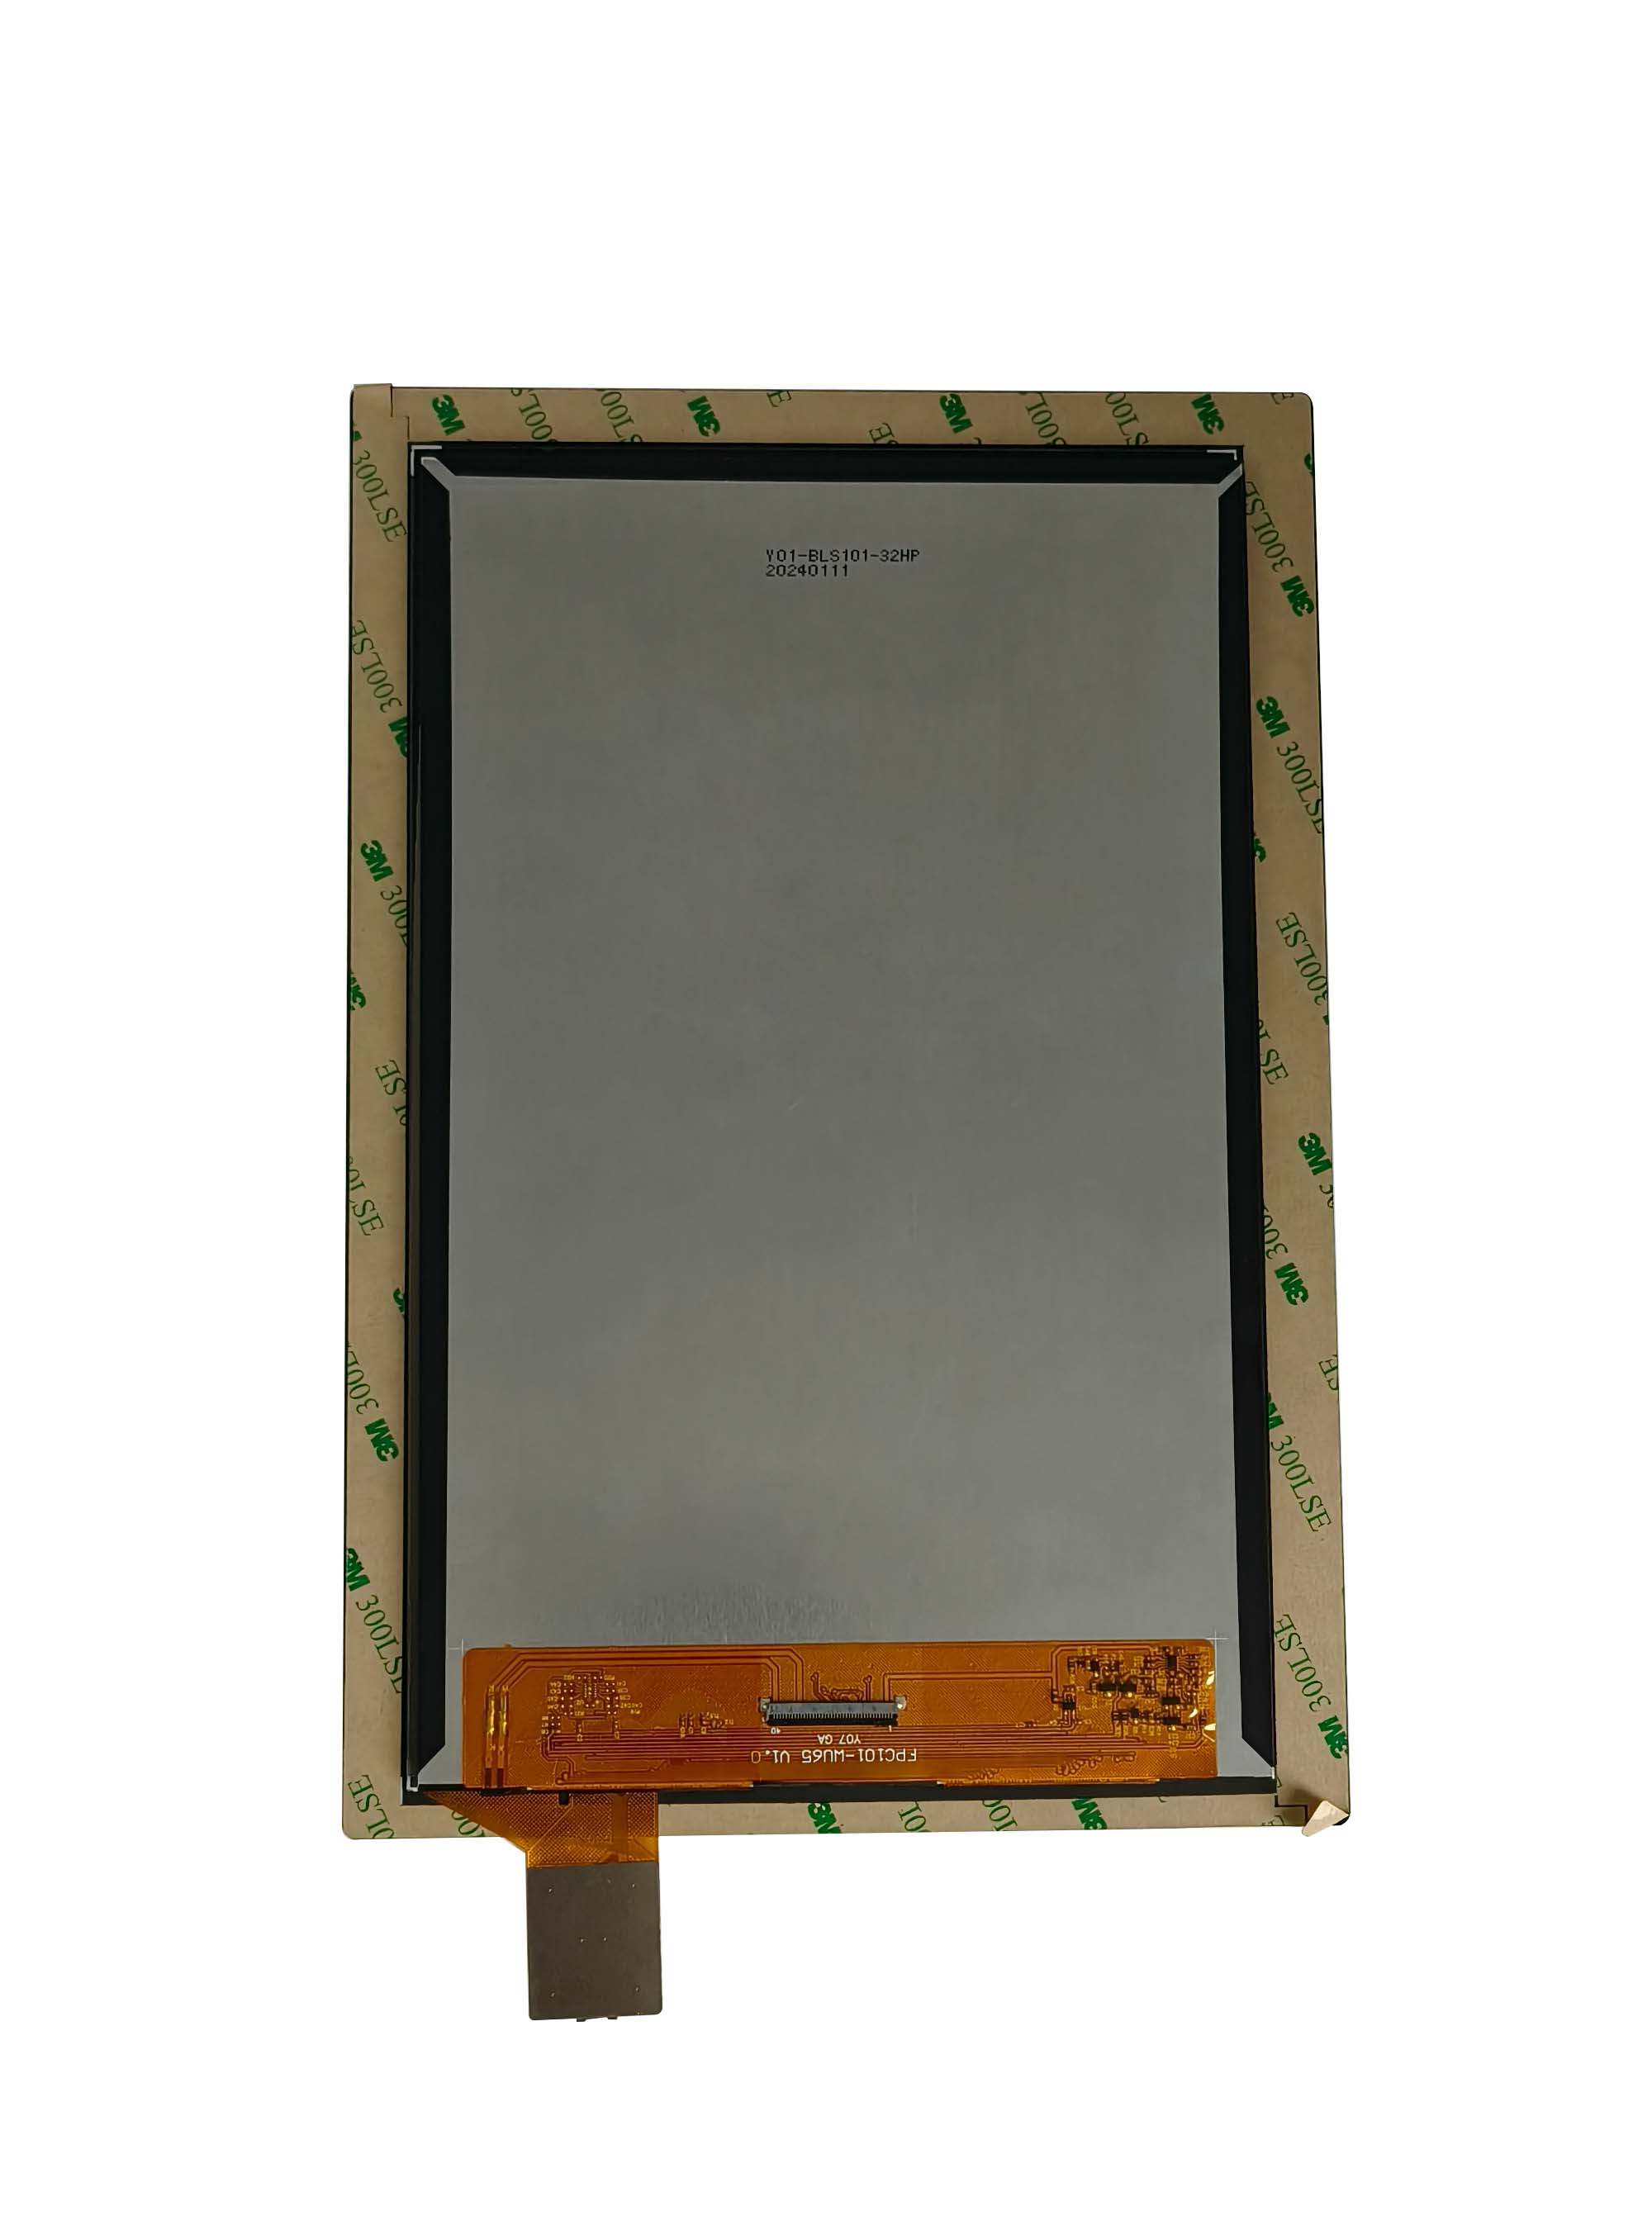 10.1inch Portrait IPS Color TFT LCD Display With PCAP & Optical Bonding